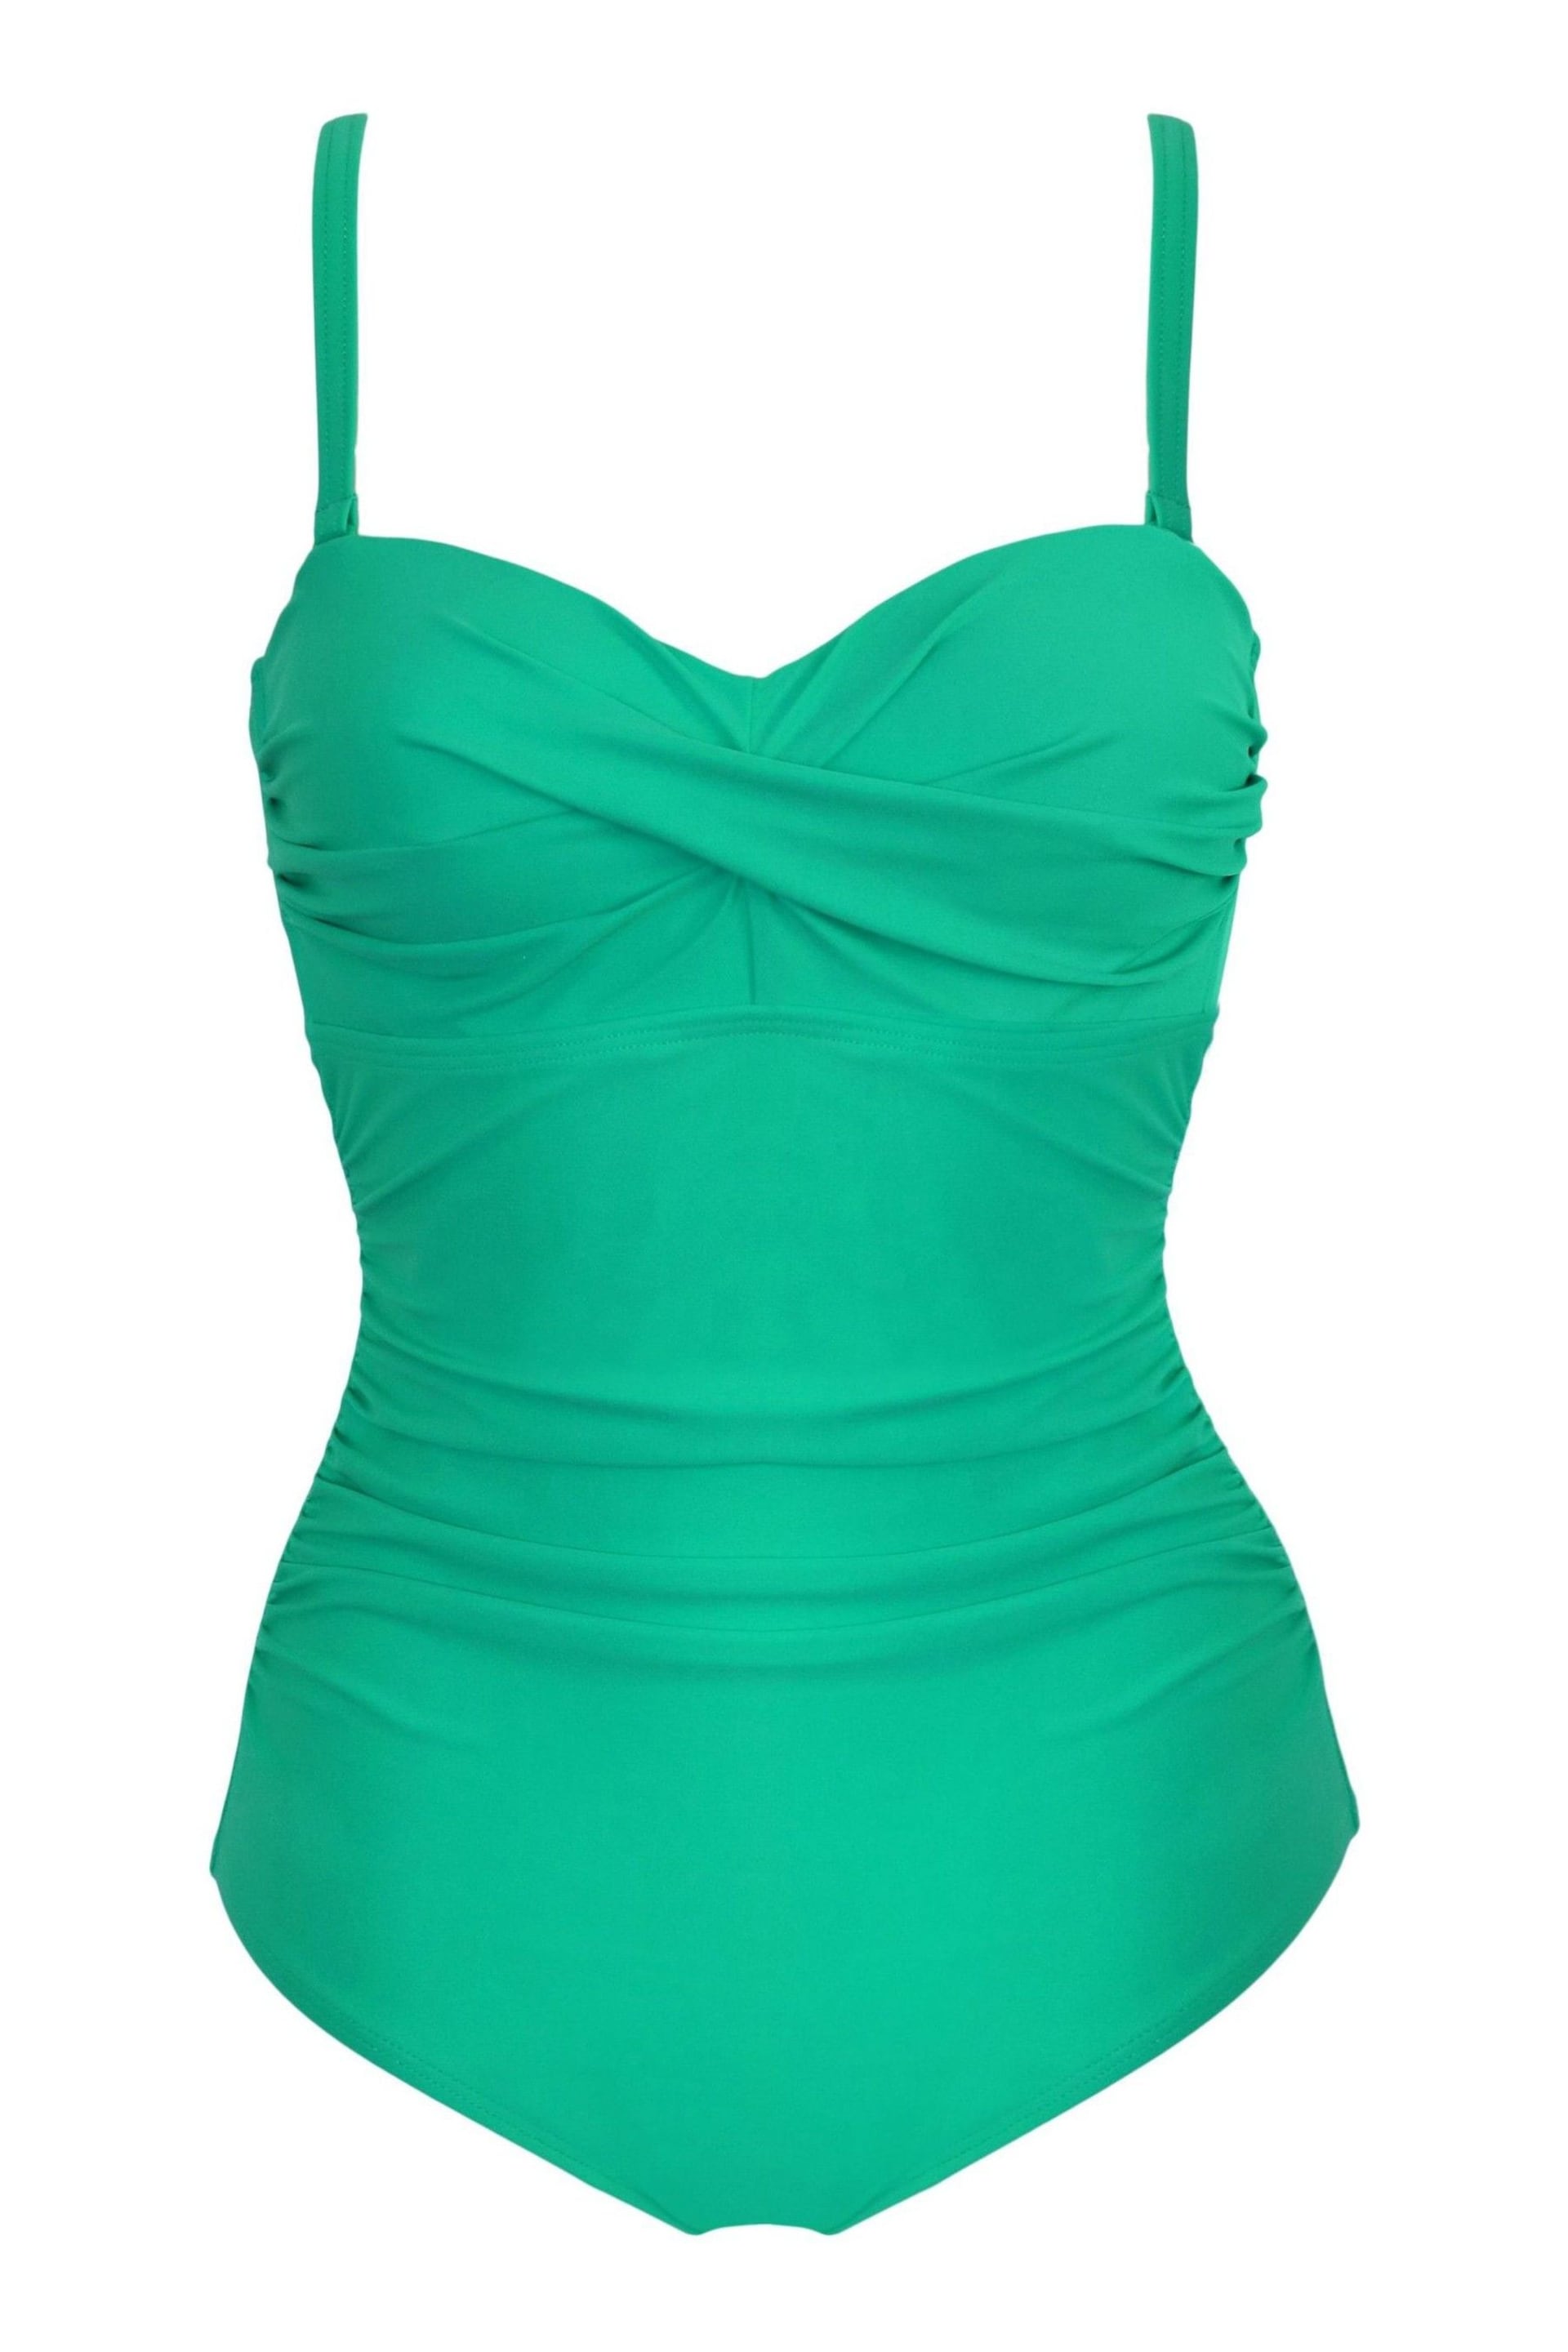 Pour Moi Turquoise Green Santa Monica Removable Straps Tummy Control Swimsuit - Image 3 of 4